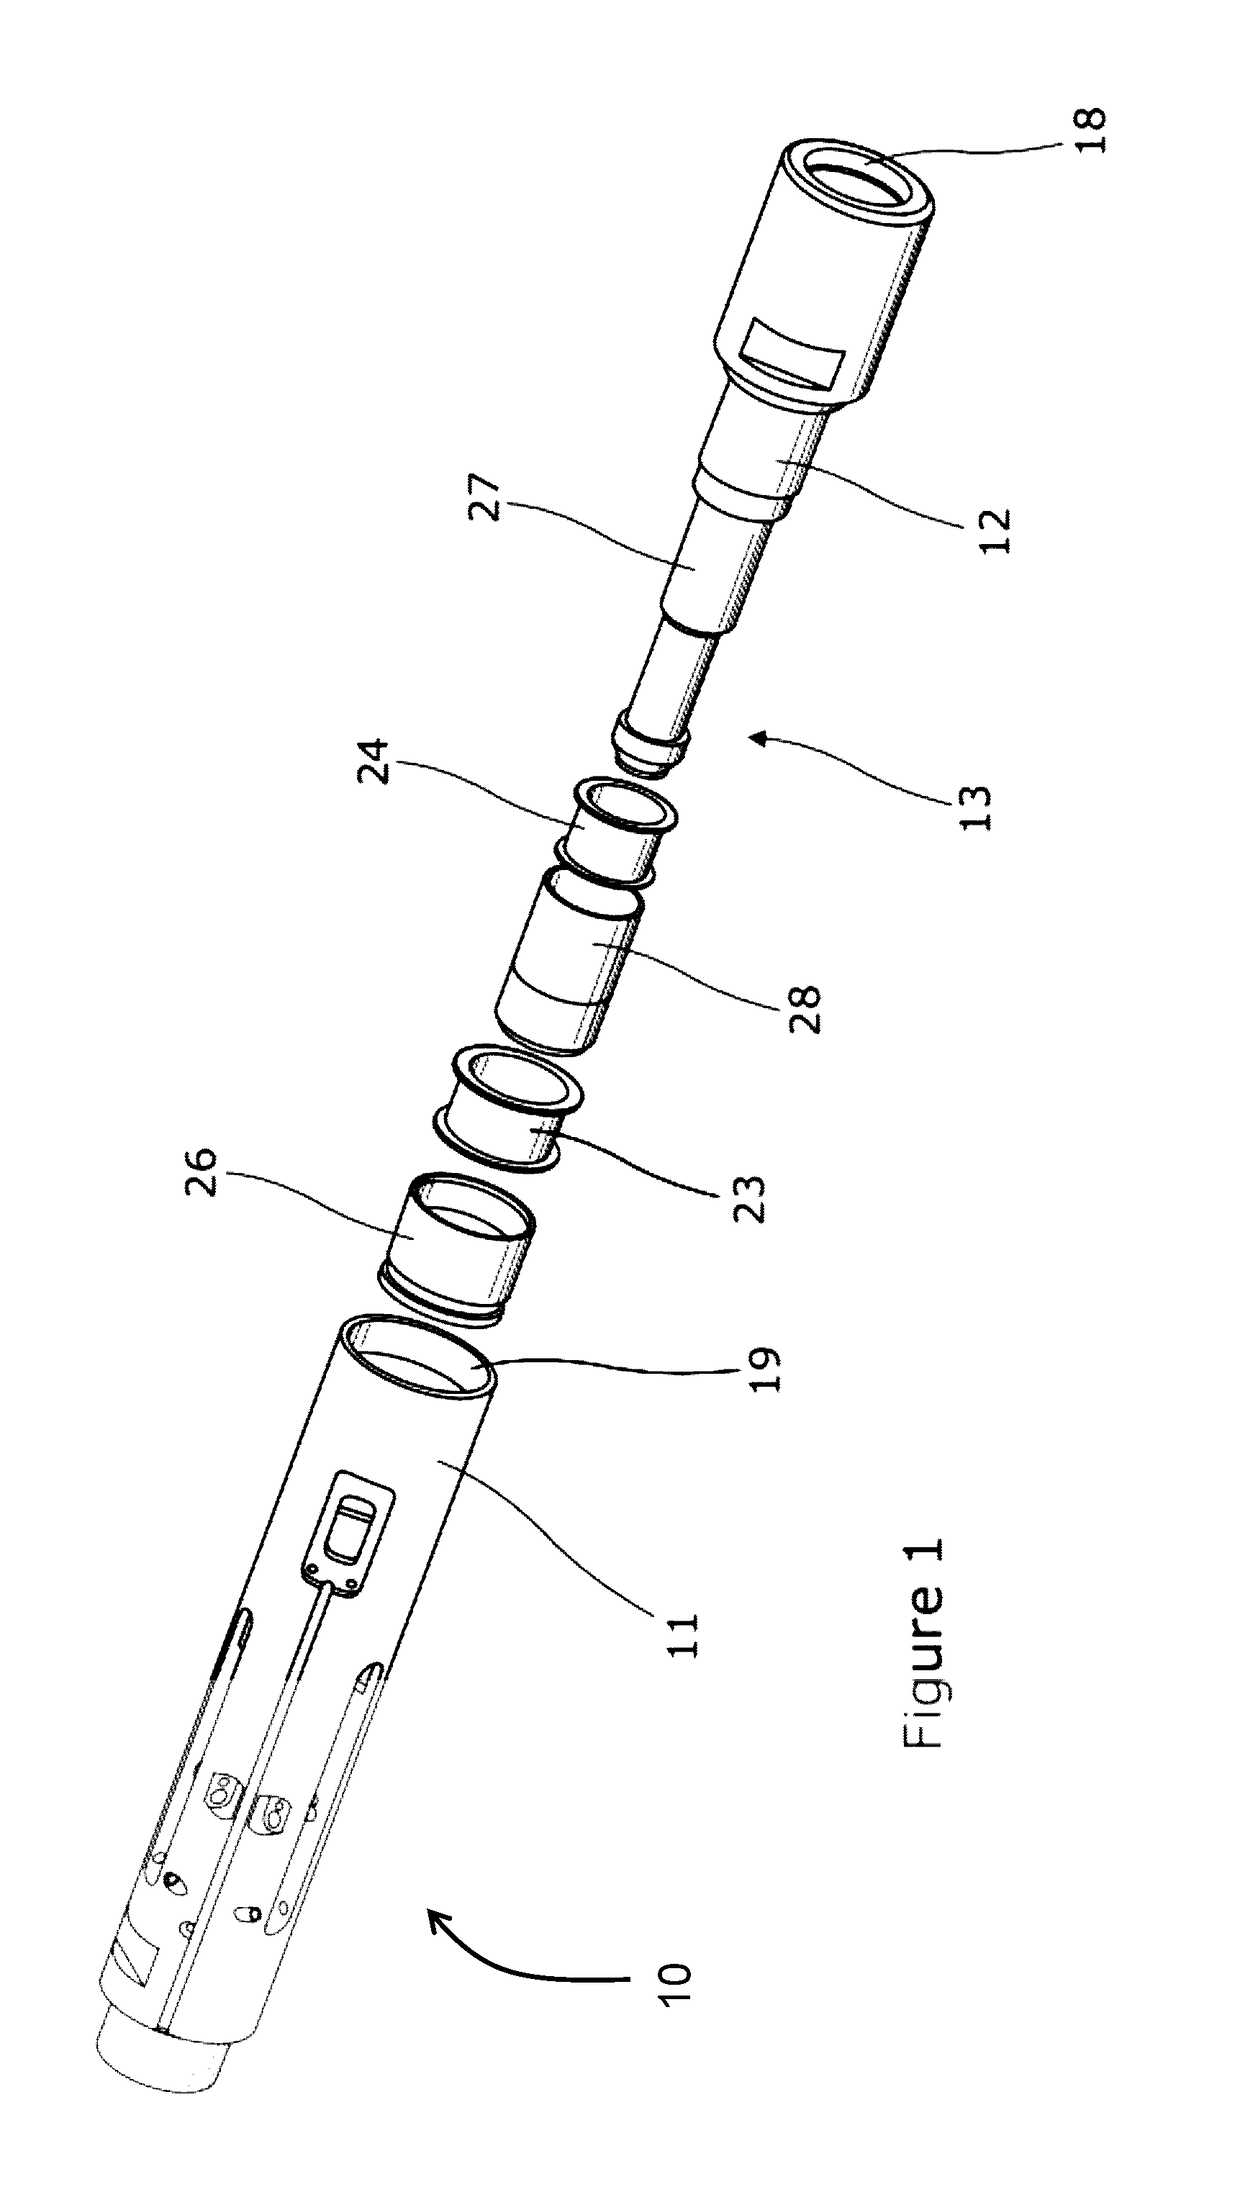 Downhole Tool Coupling and Method of its Use